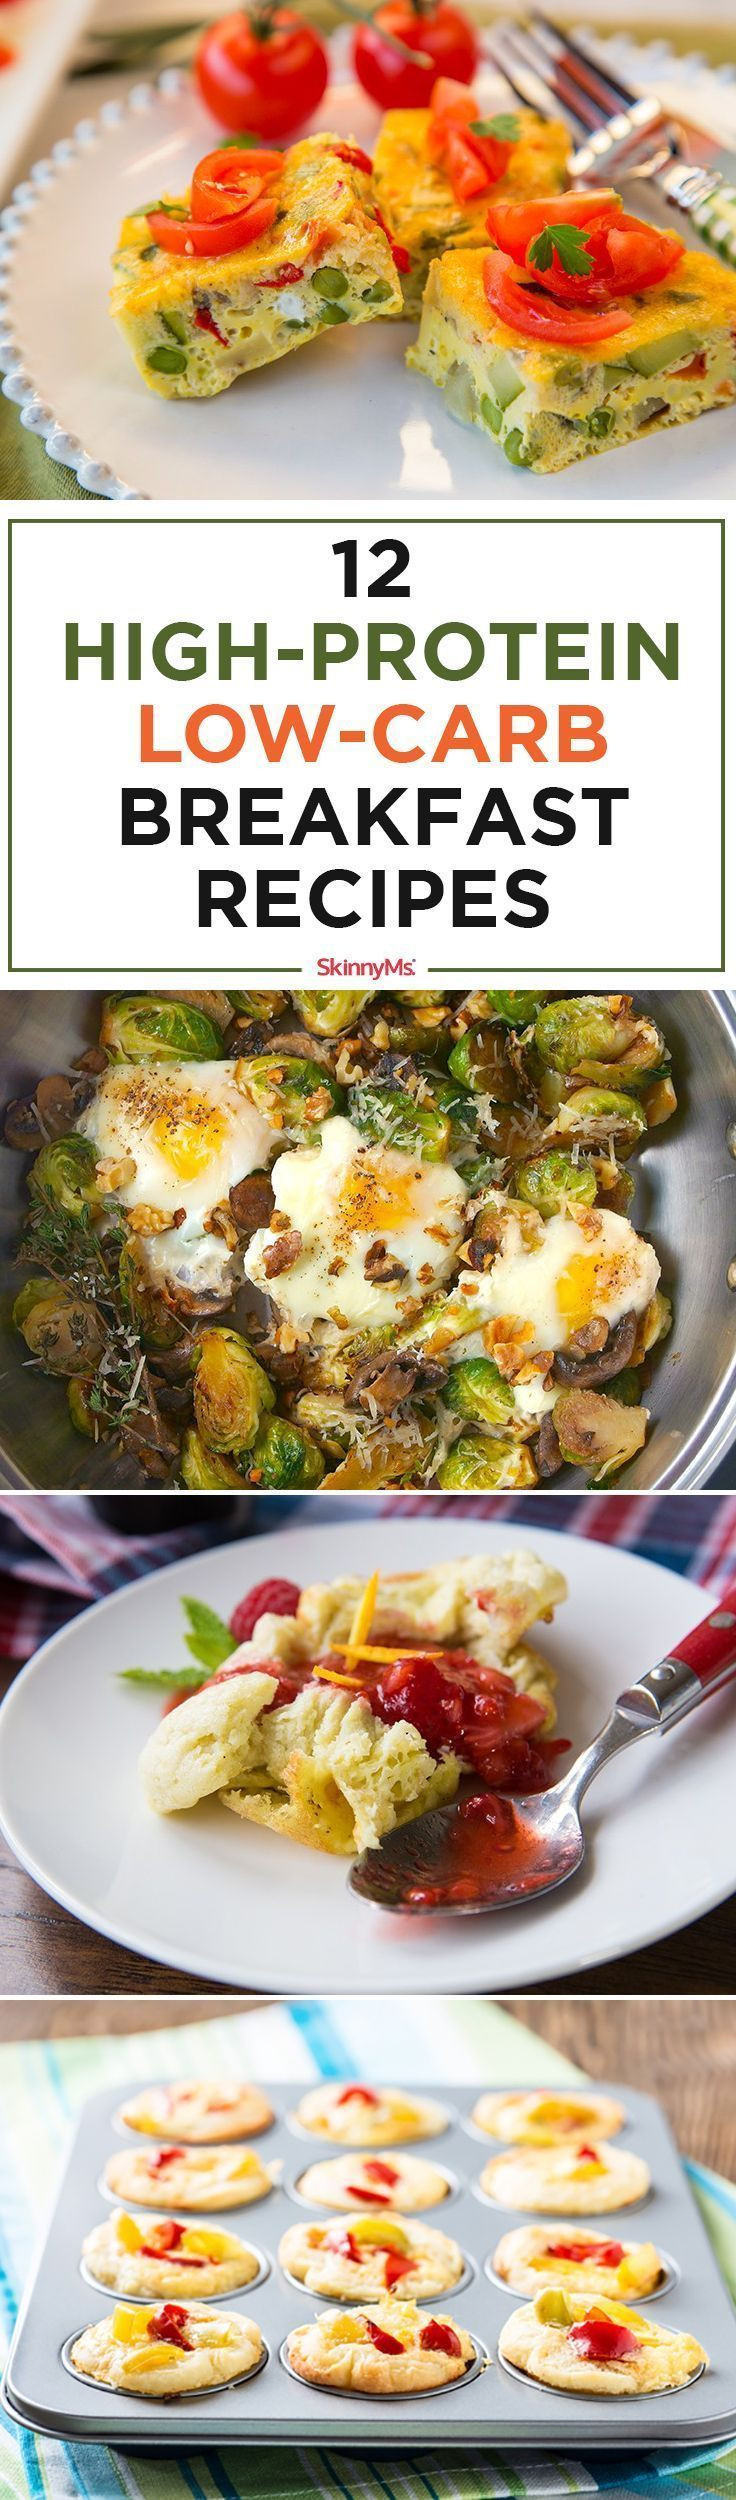 High Protein Low Carb Breakfast Without Eggs
 17 Best ideas about High Protein Breakfast on Pinterest